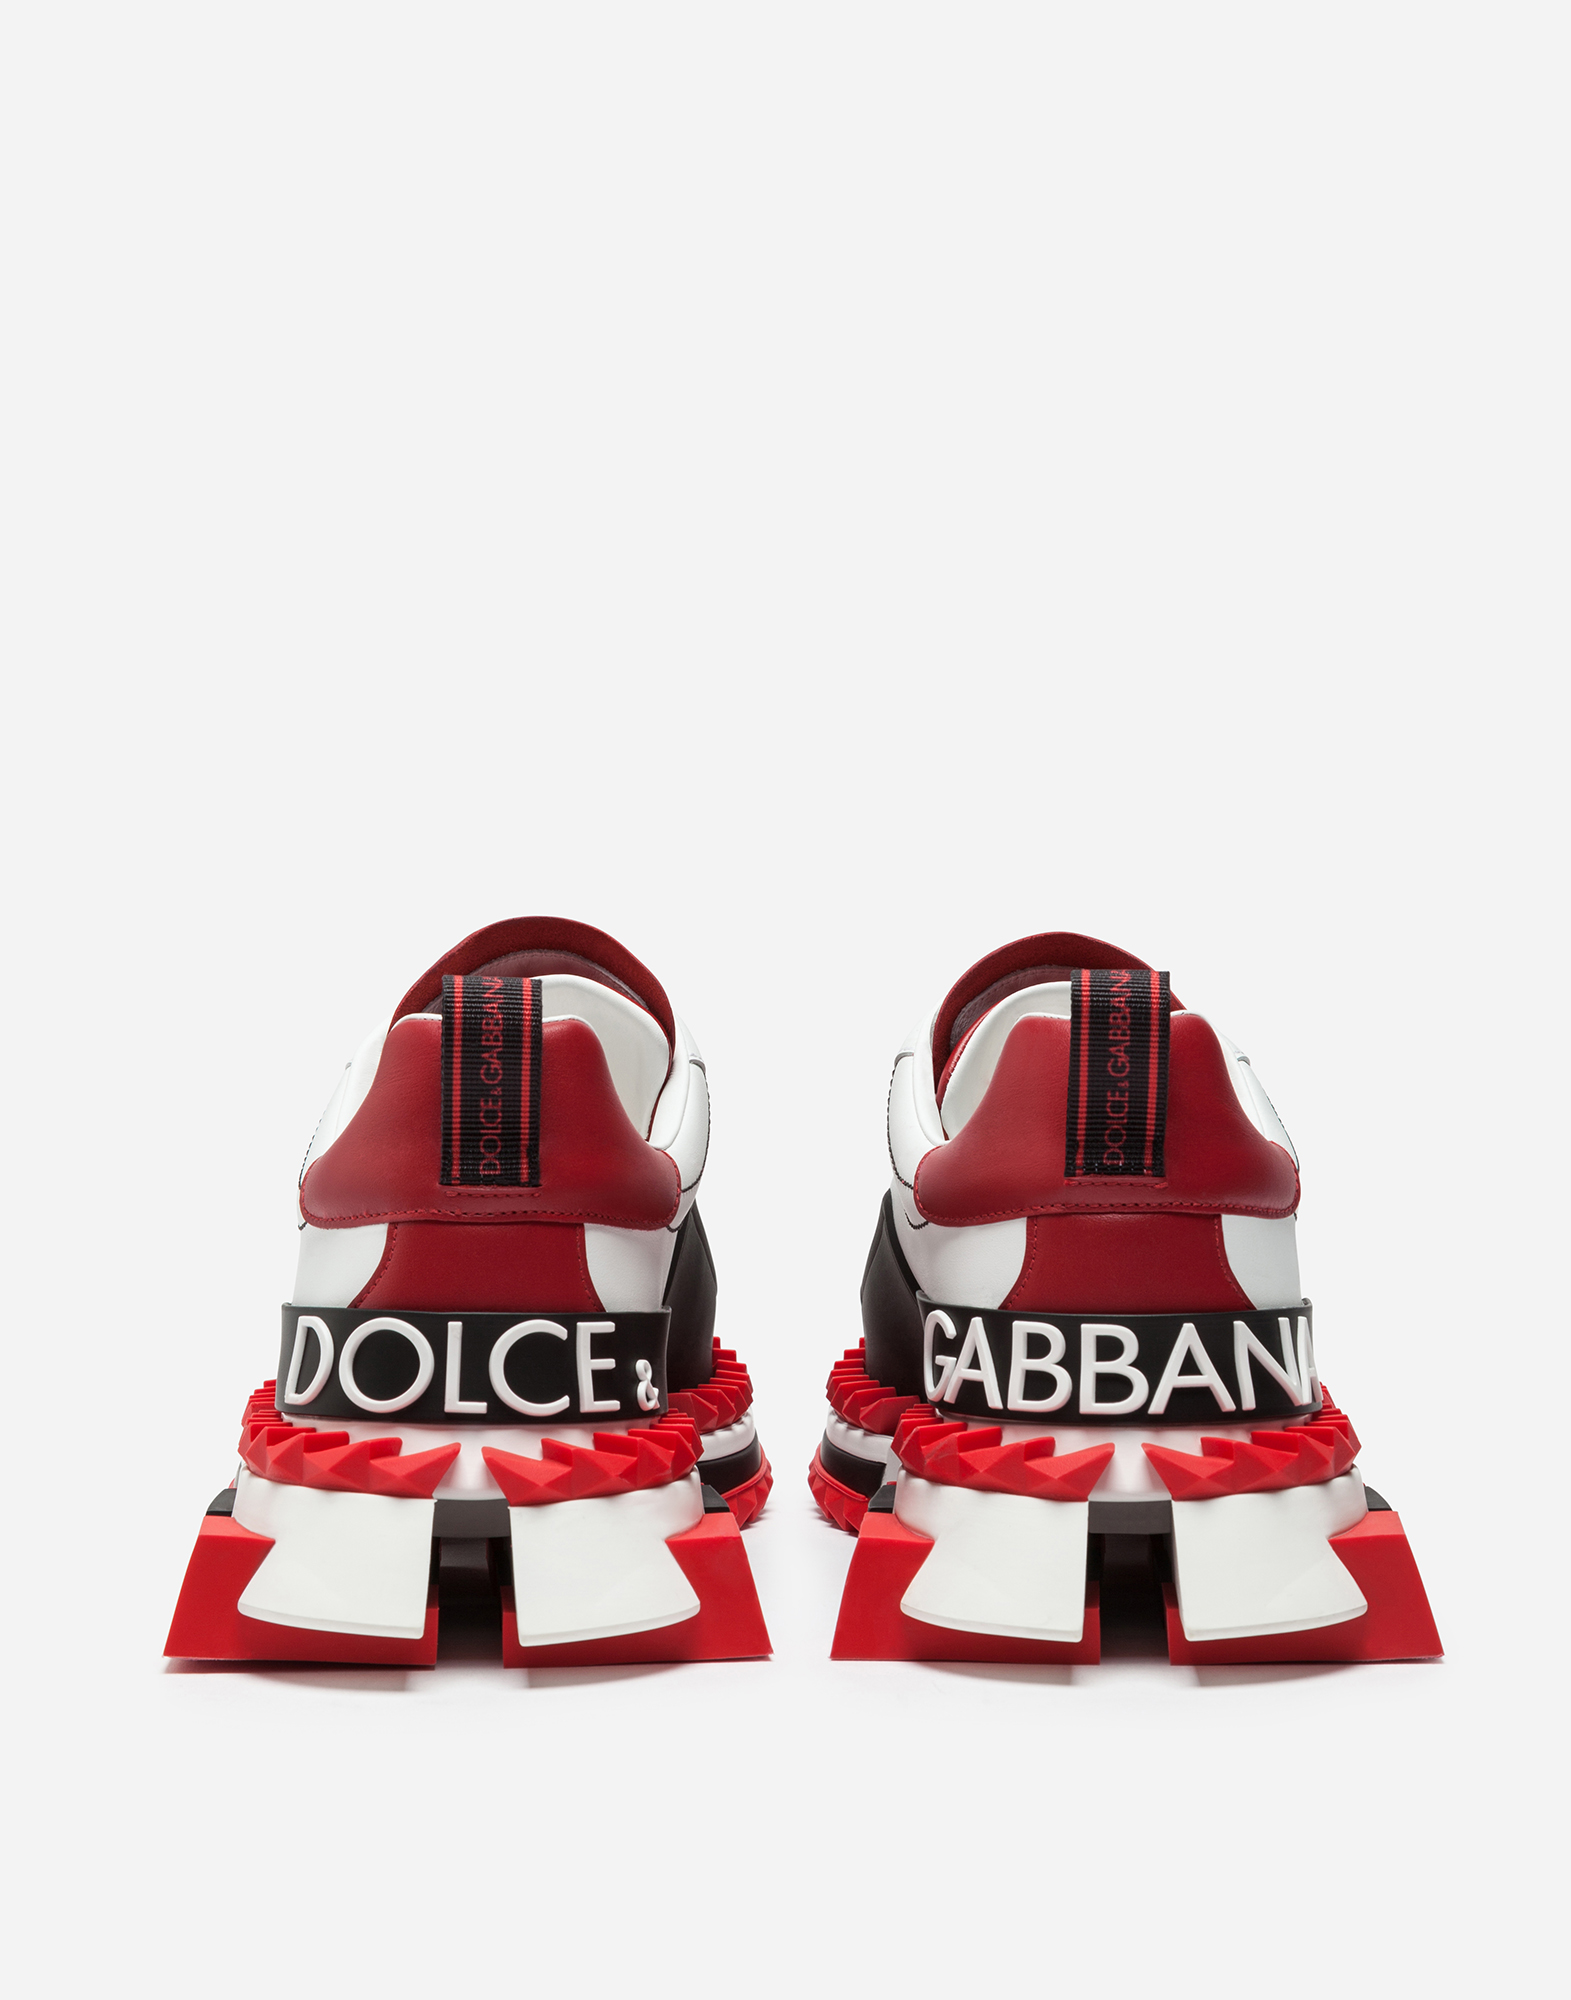 dolce and gabbana red shoes